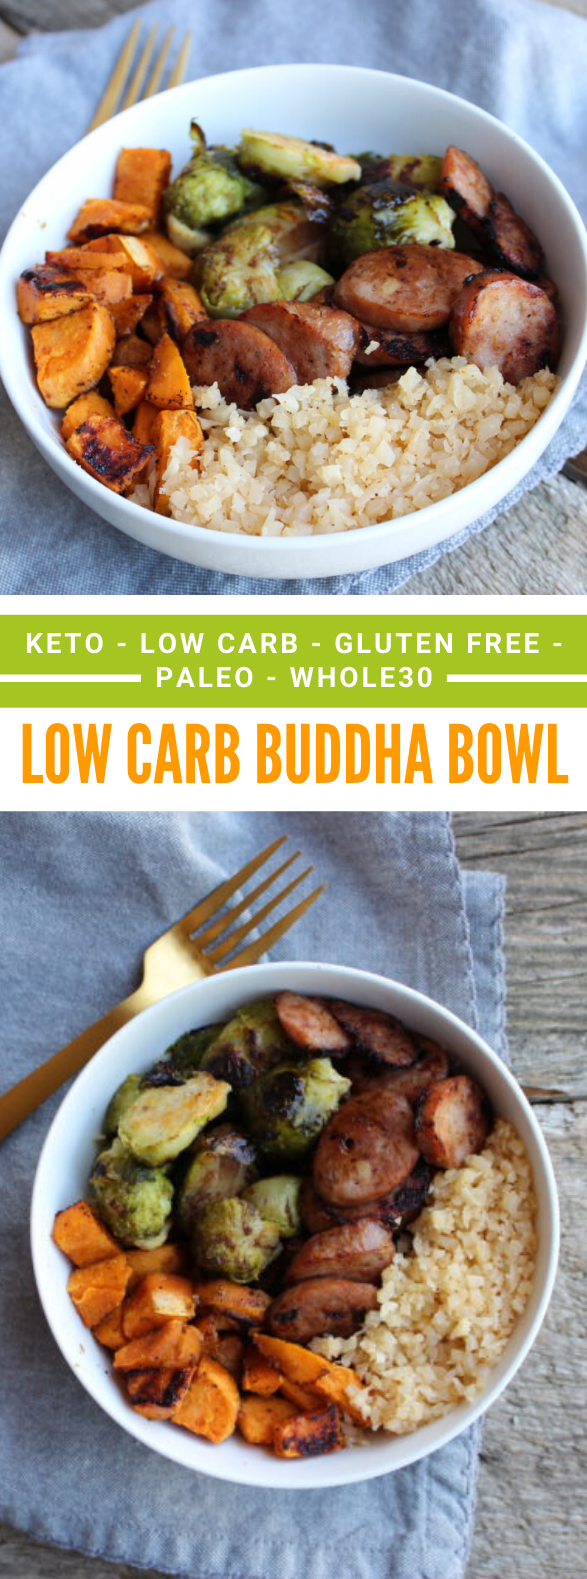 Low Carb Buddha Bowls #diet #healthy